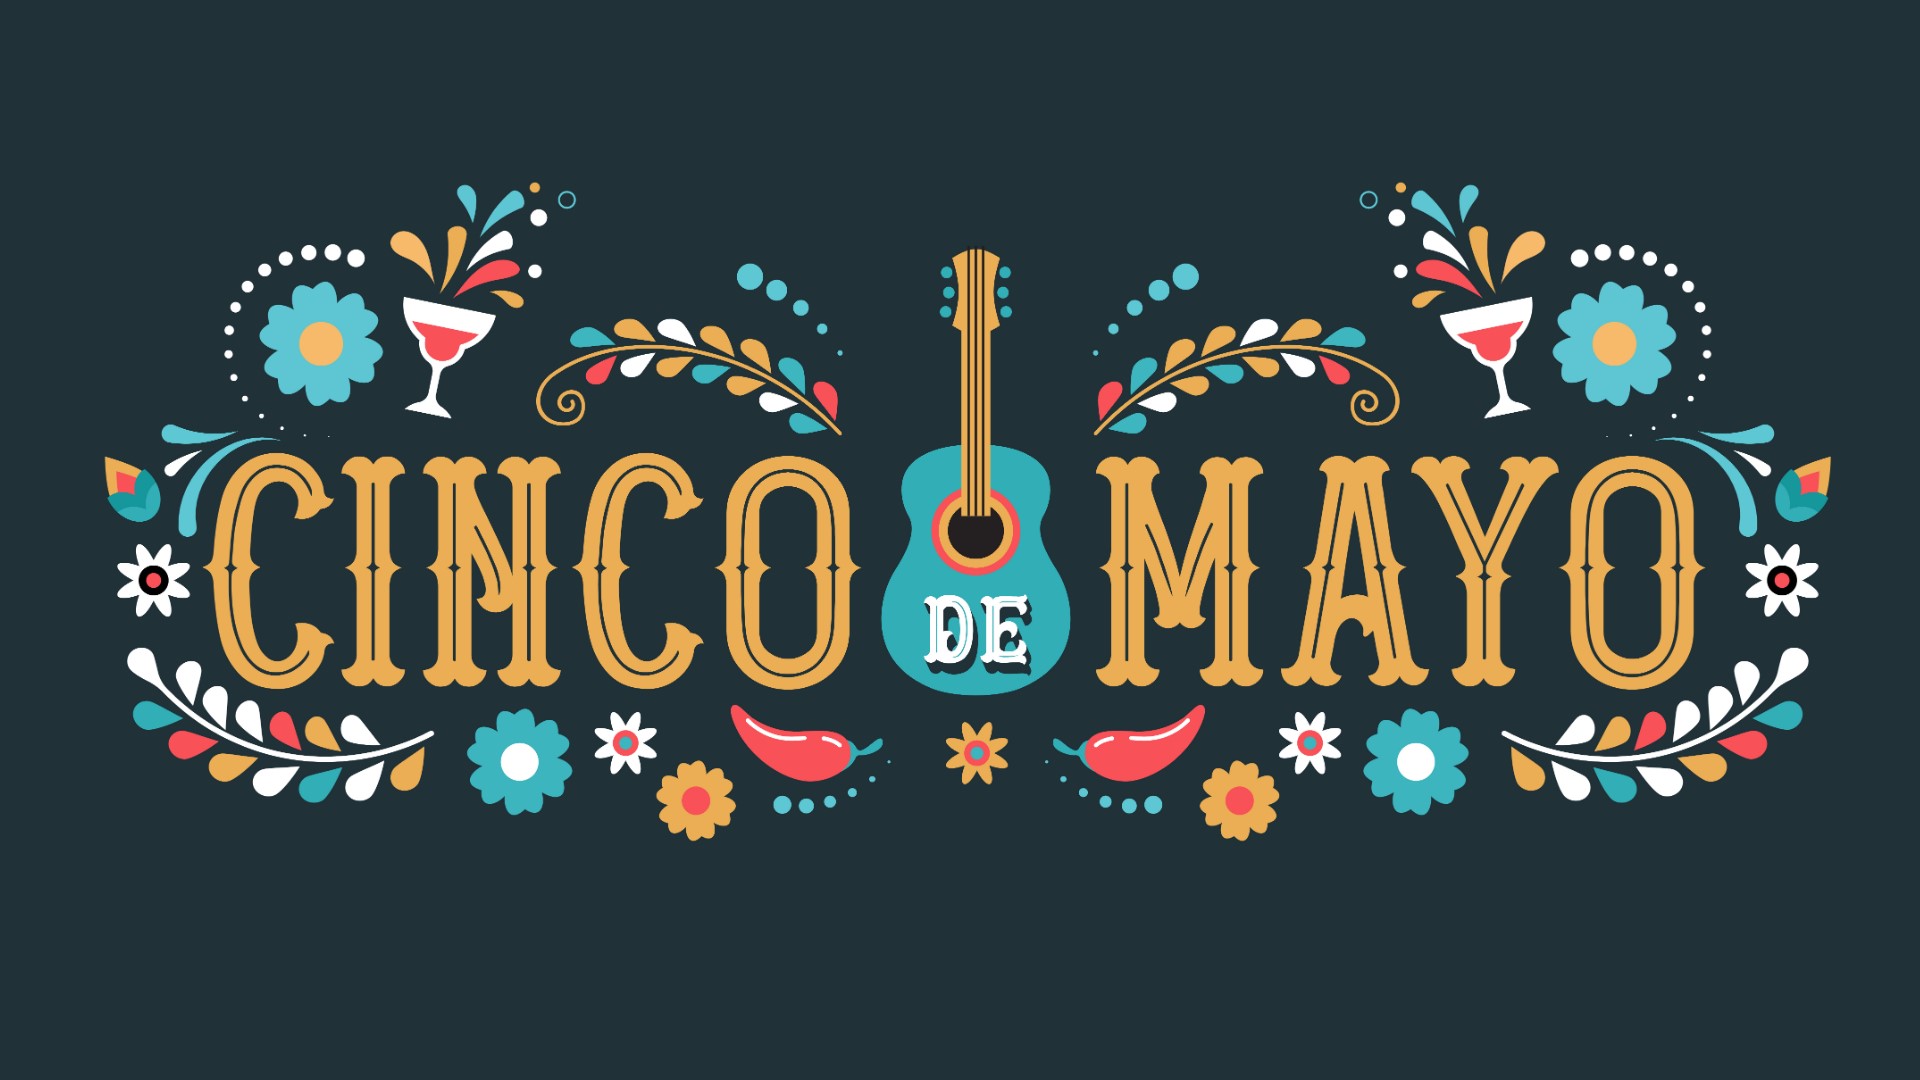 Denver's Cinco de Mayo celebration will have more than 350 exhibitors and food vendors, entertainment on several stages, children’s carnival, parade, chihuahua races, taco eating contest and more.